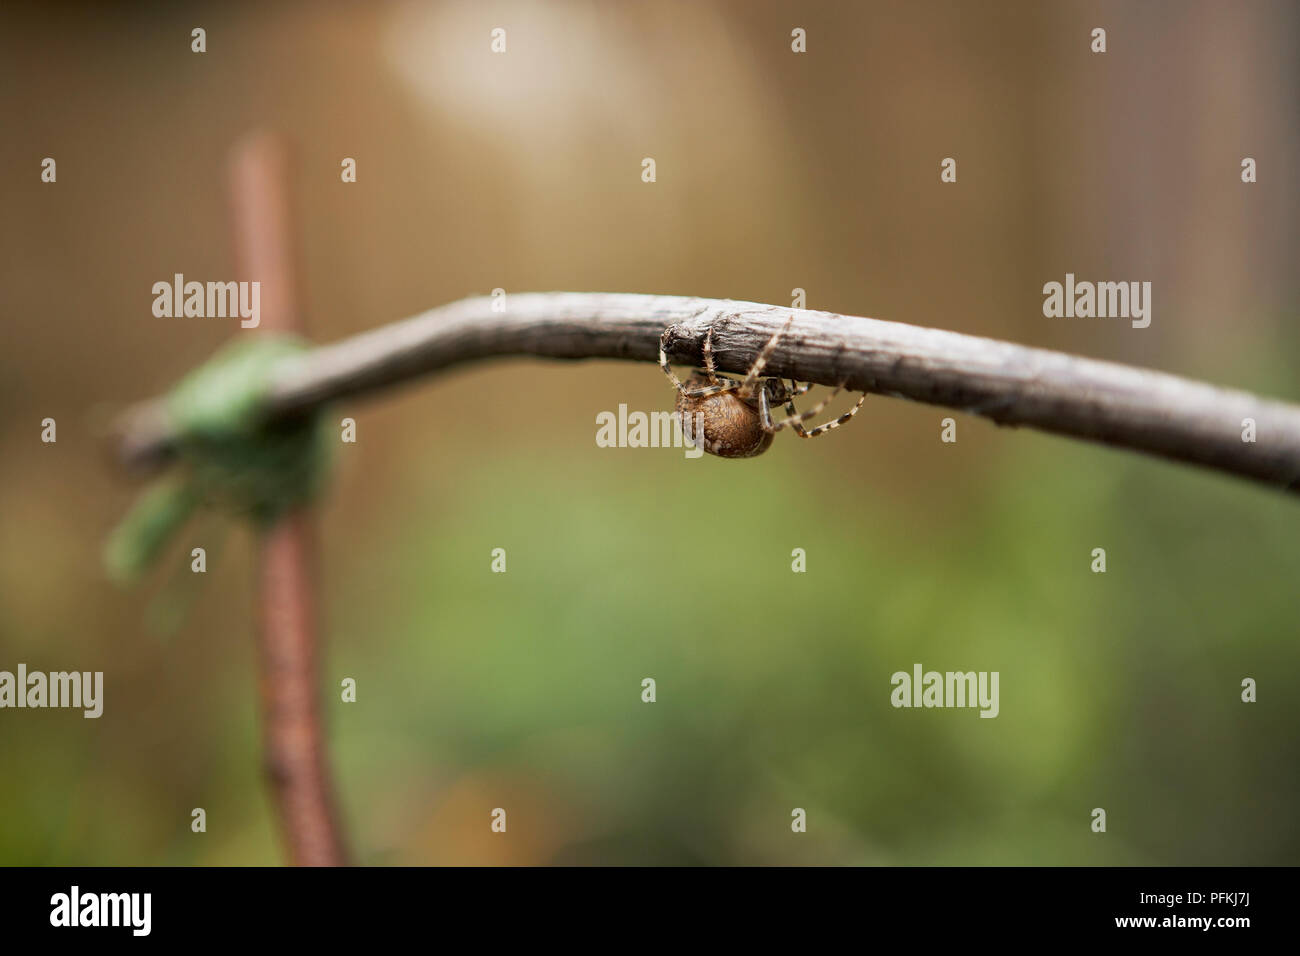 Spider crawling along on the underside of a twig, close-up Stock Photo